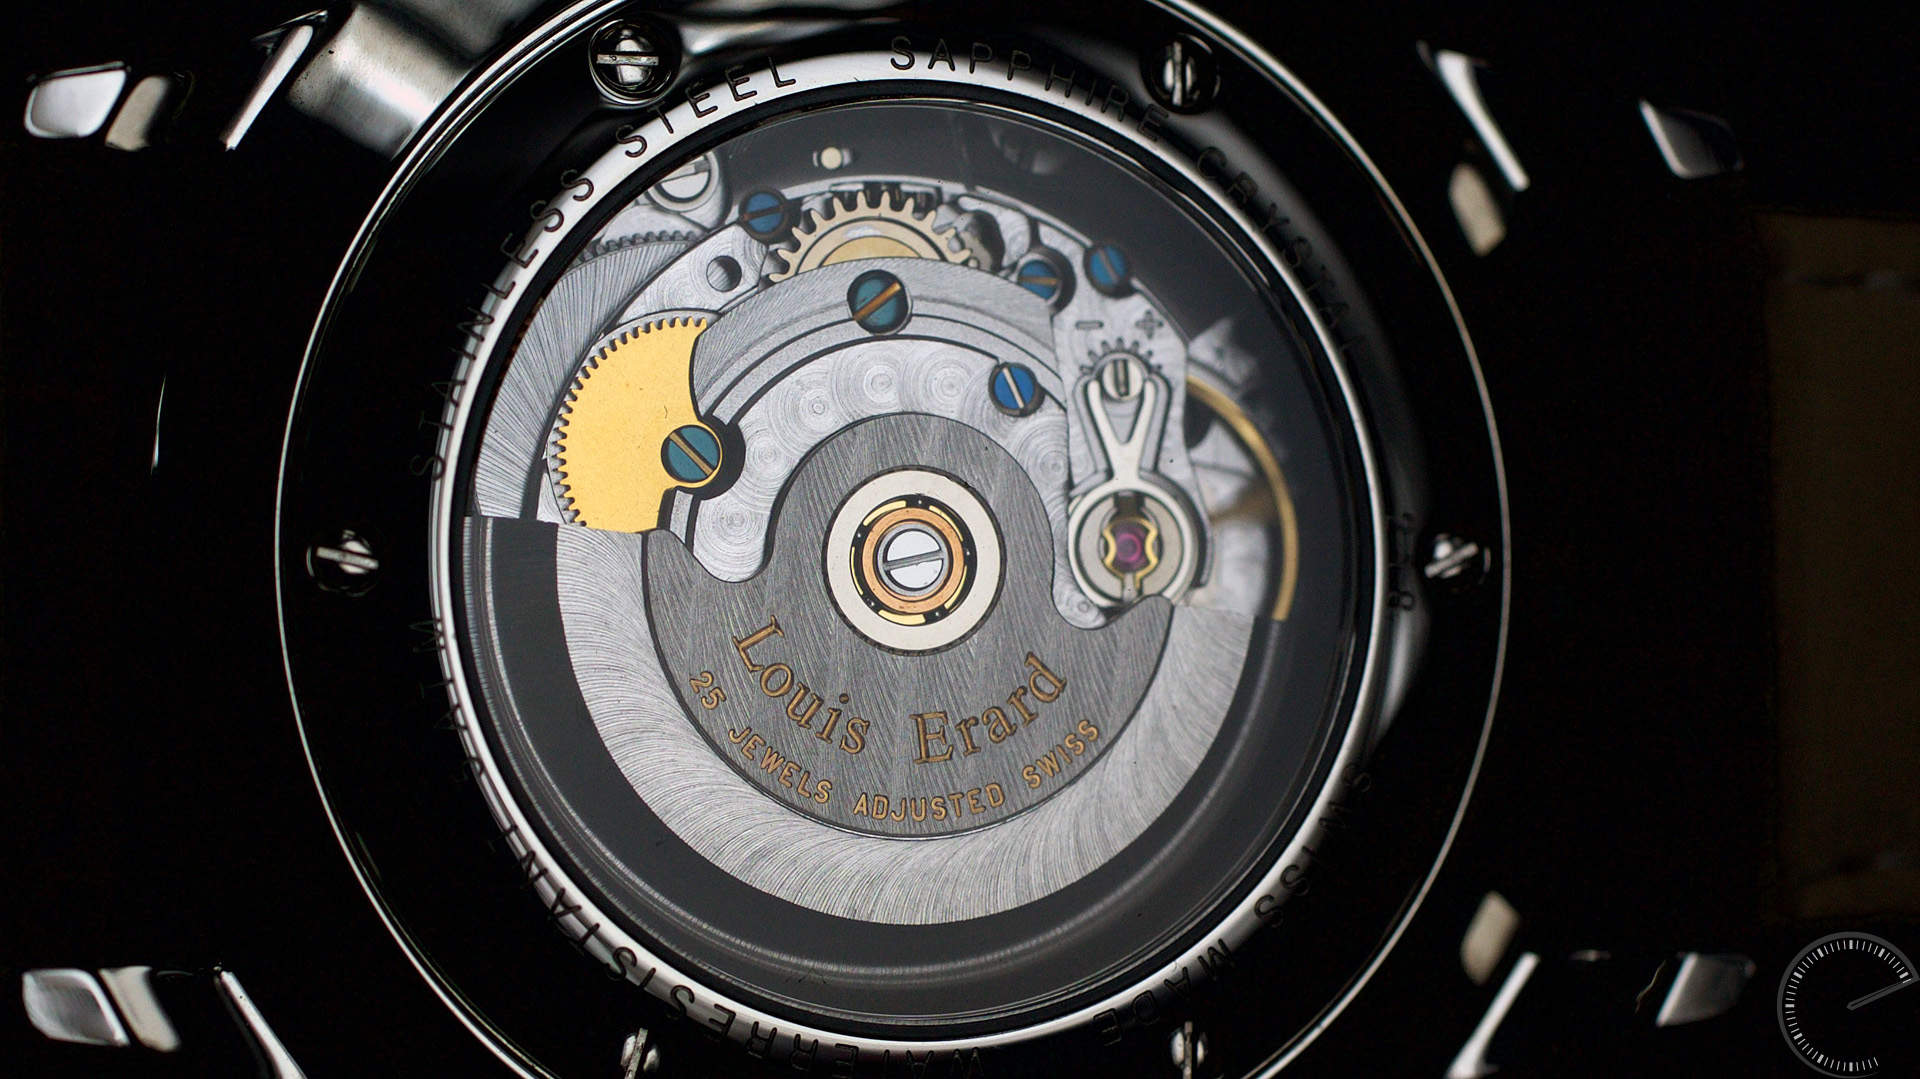 Louis Erard 1931 Moonphase - ESCAPEMENT - watch replica review magazine by Angus Davies